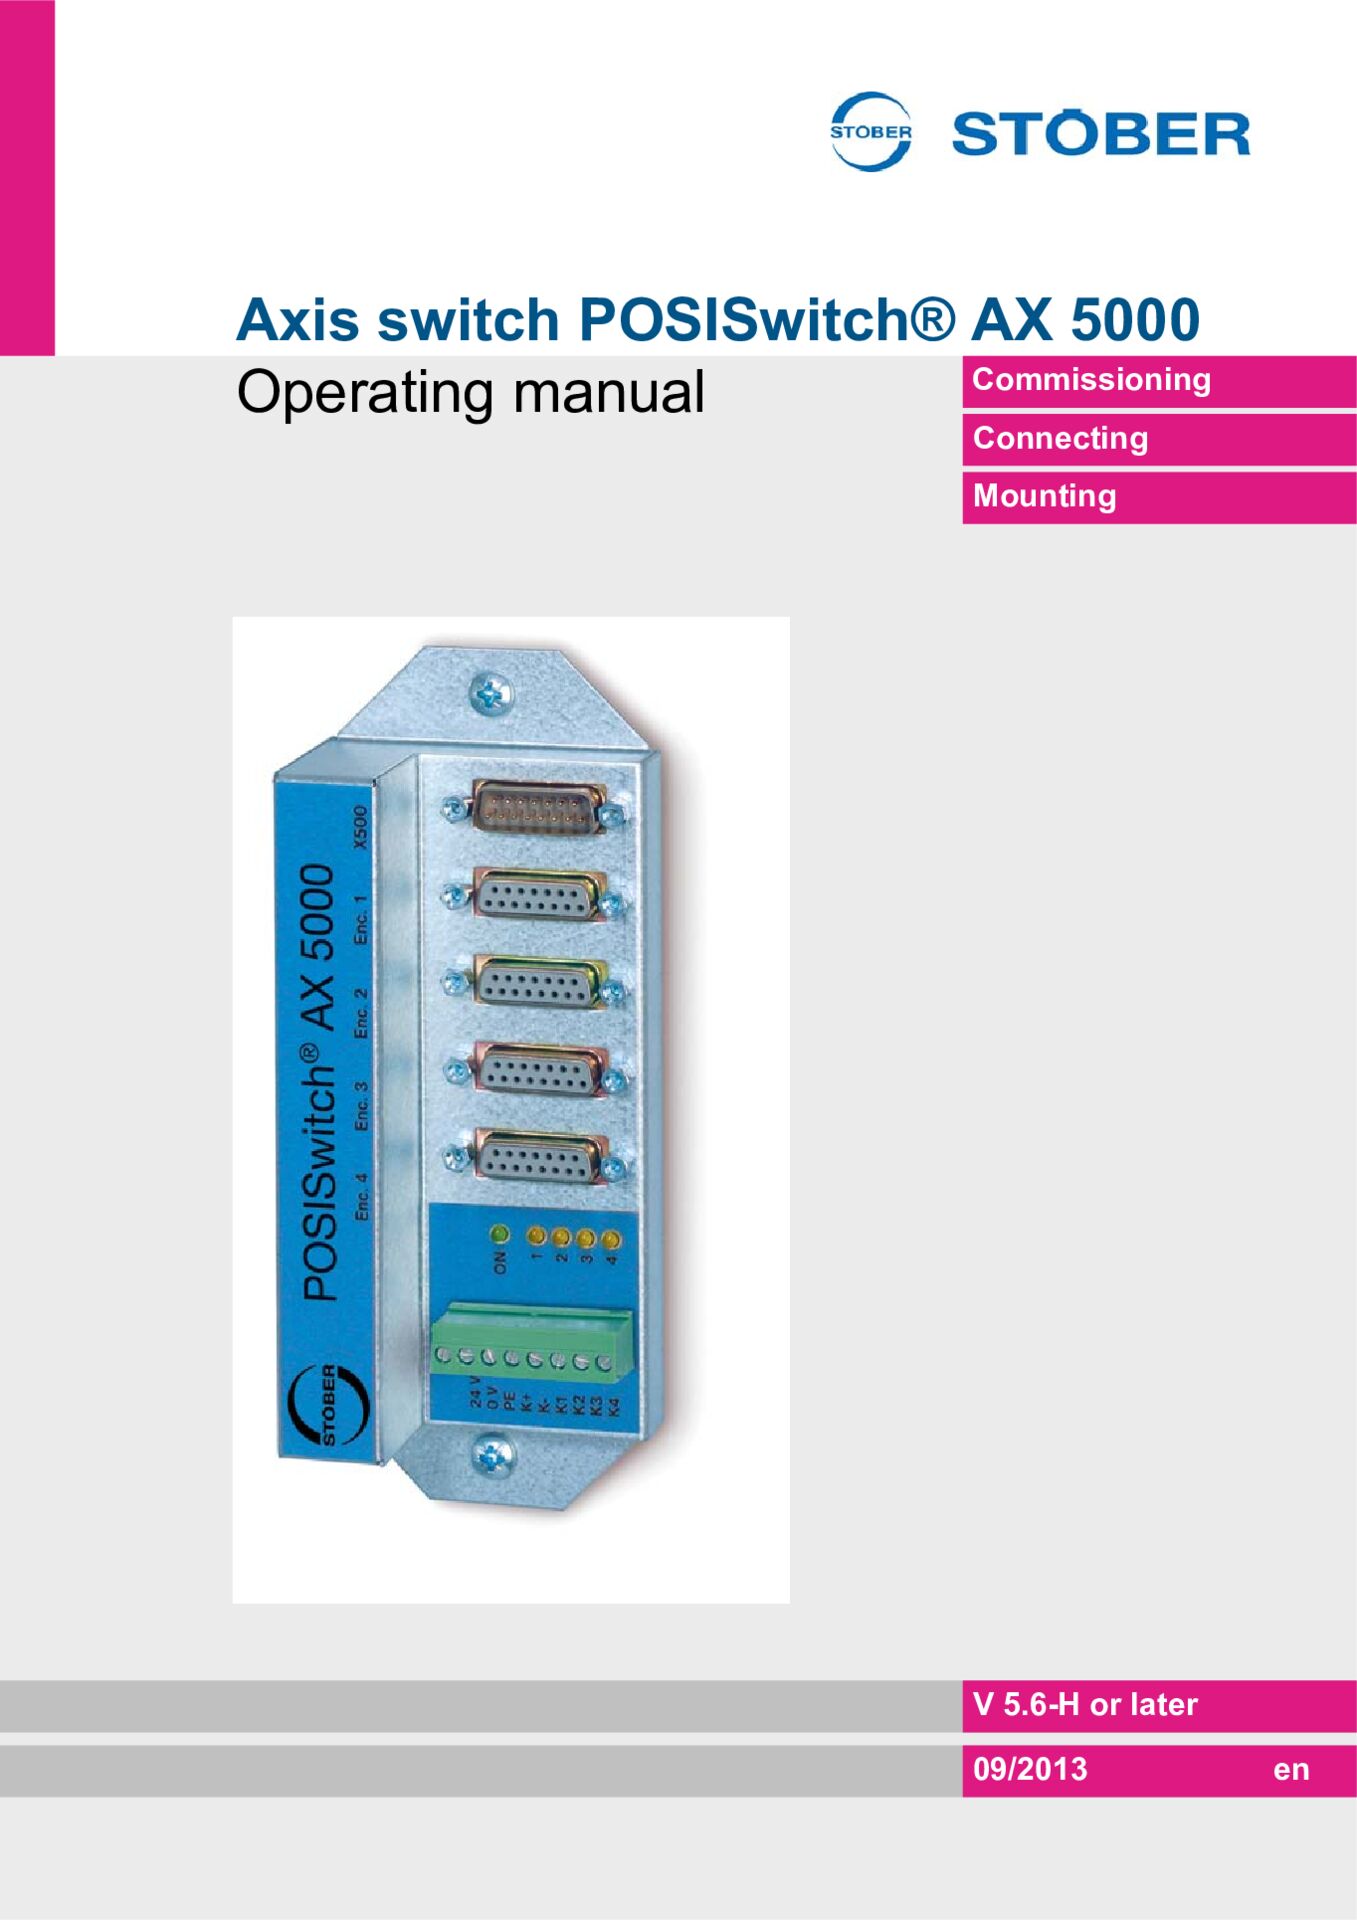 Operating manual POSISwitch AX 5000 axis switch